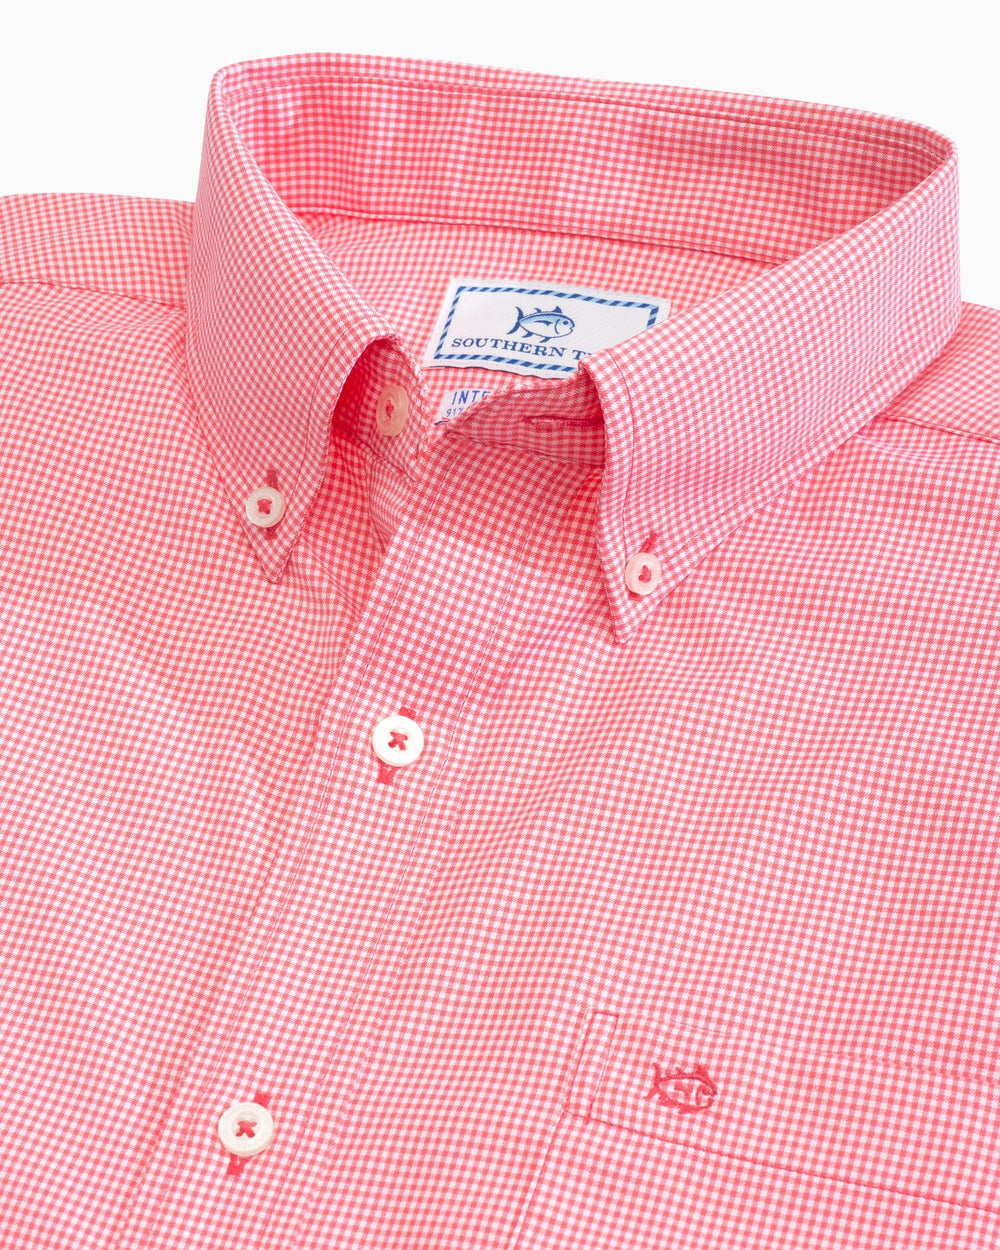 The collar of the Men's Pink Micro Gingham Intercoastal Performance Sport Shirt by Southern Tide - Sunkist Coral